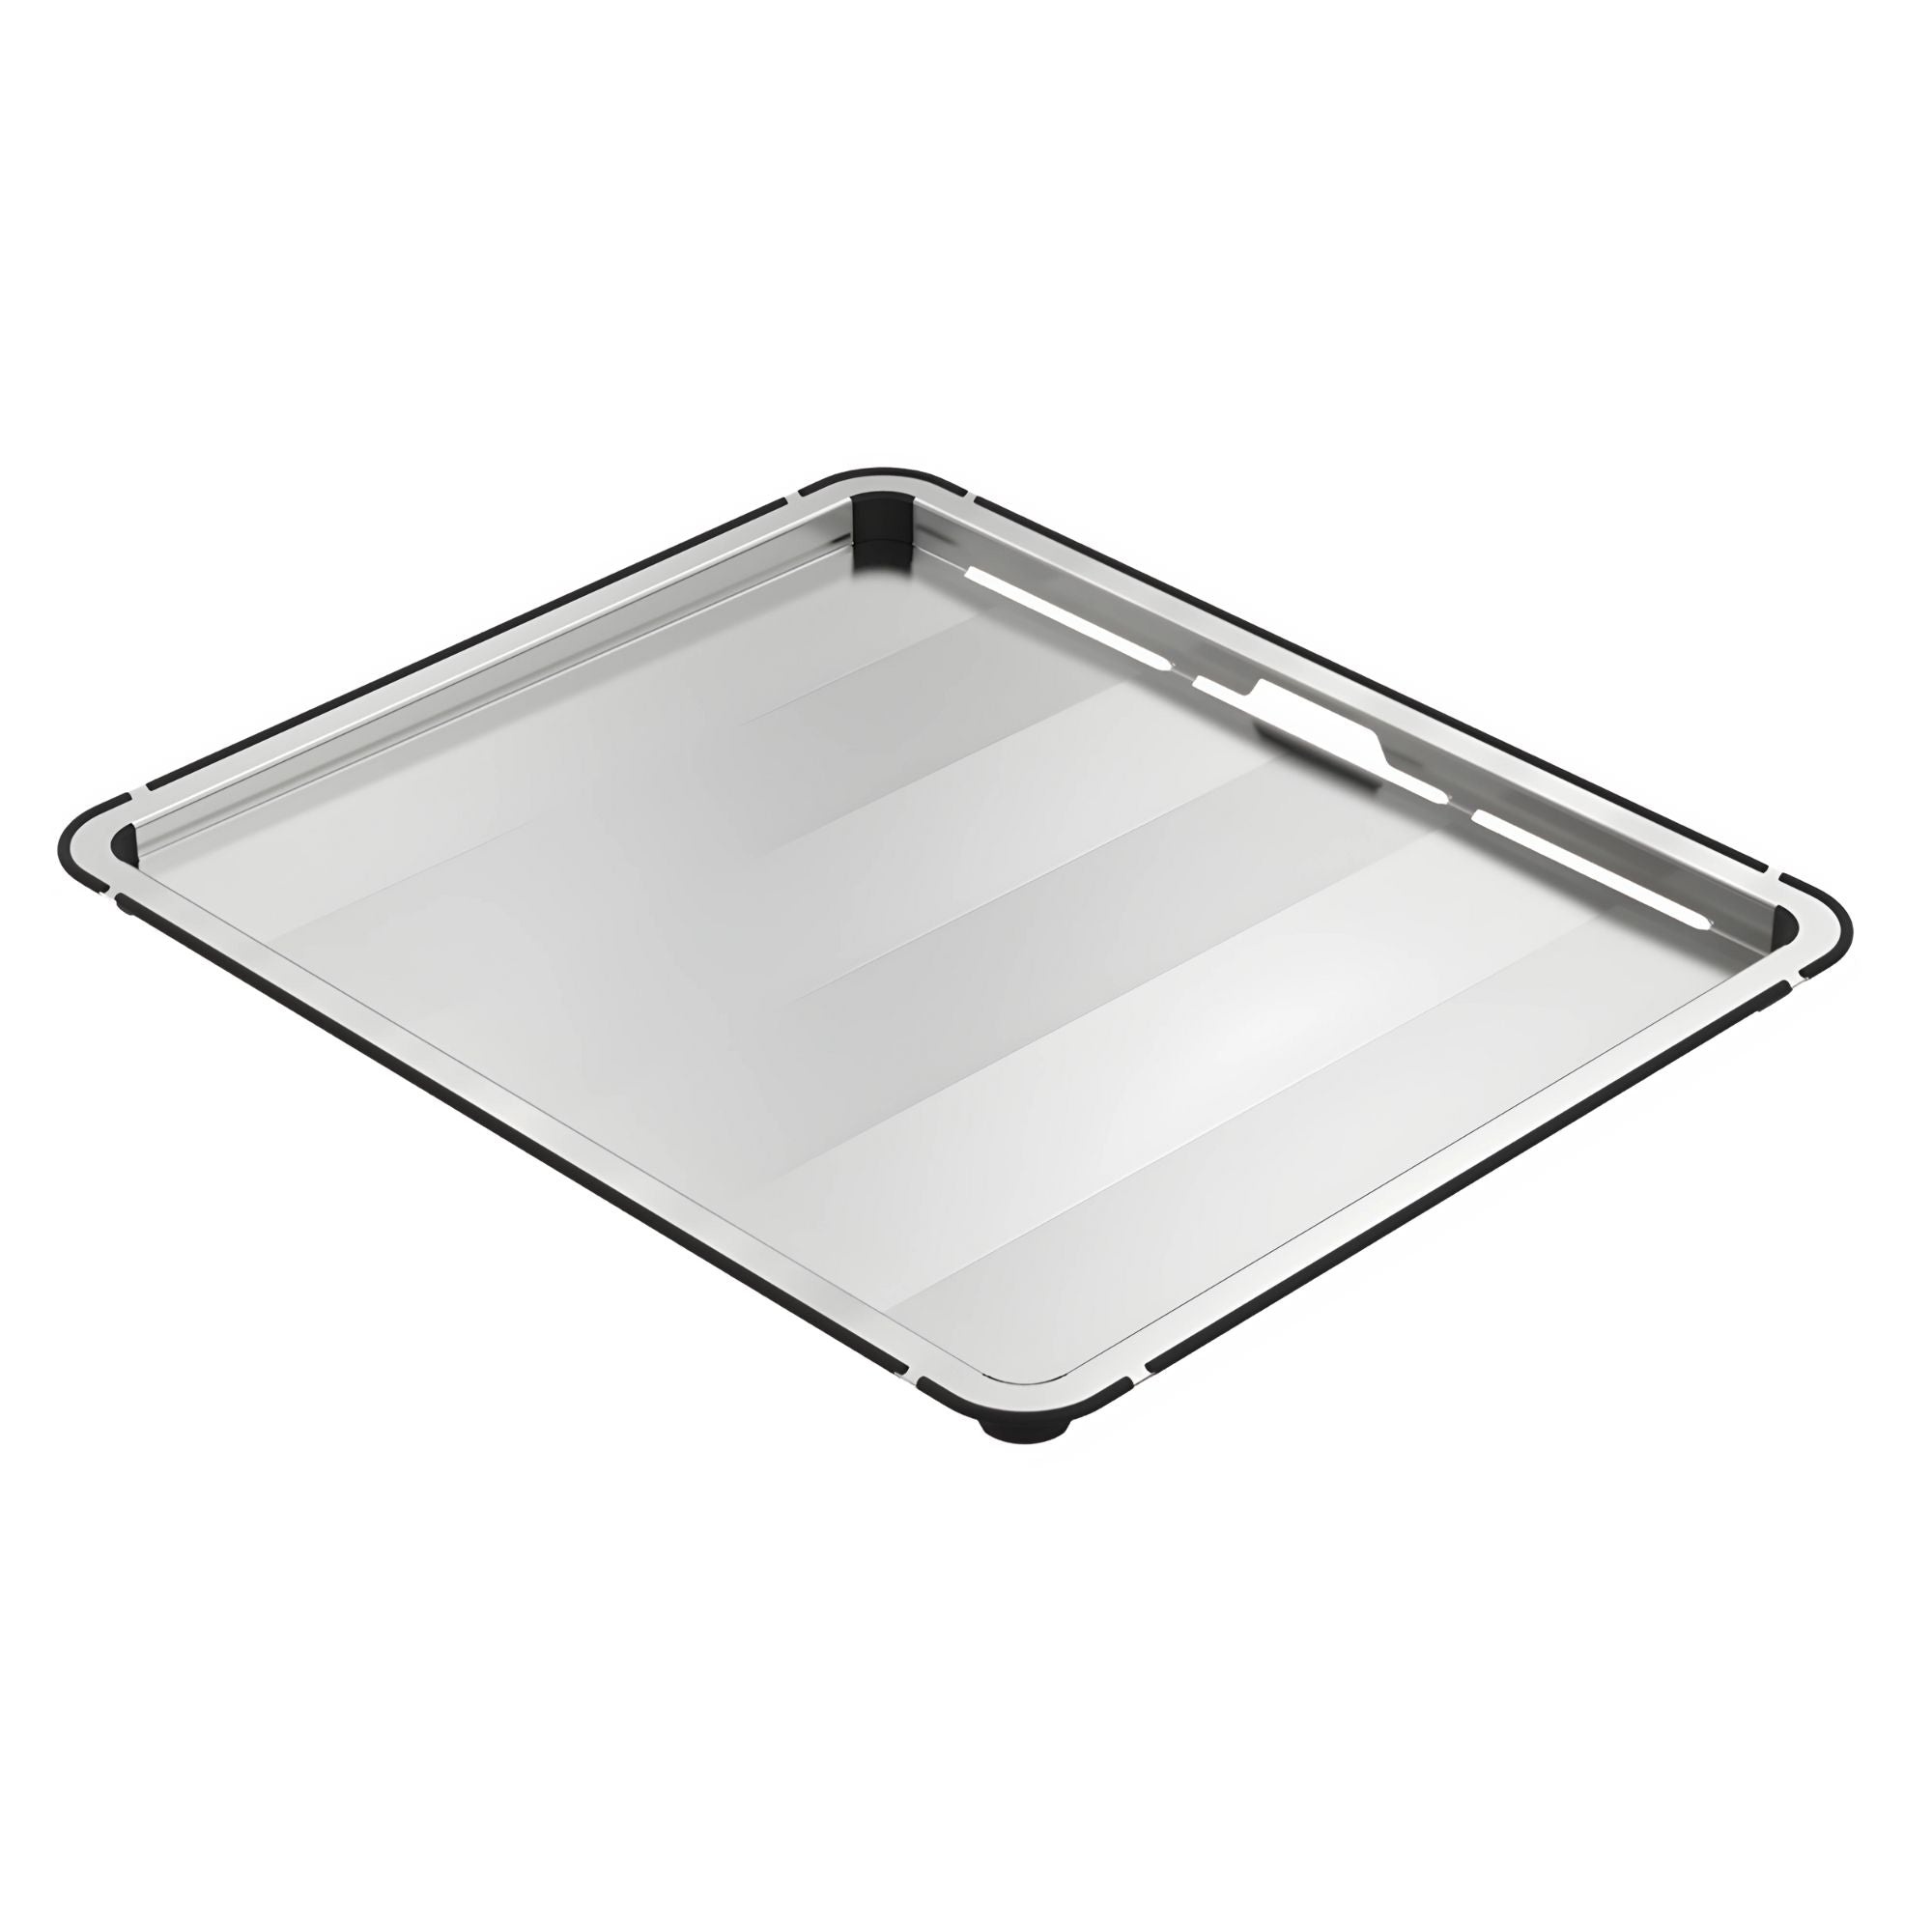 ABEY PIAZZA 540 SQUARE BOWL KITCHEN SINK STAINLESS STEEL 590MM